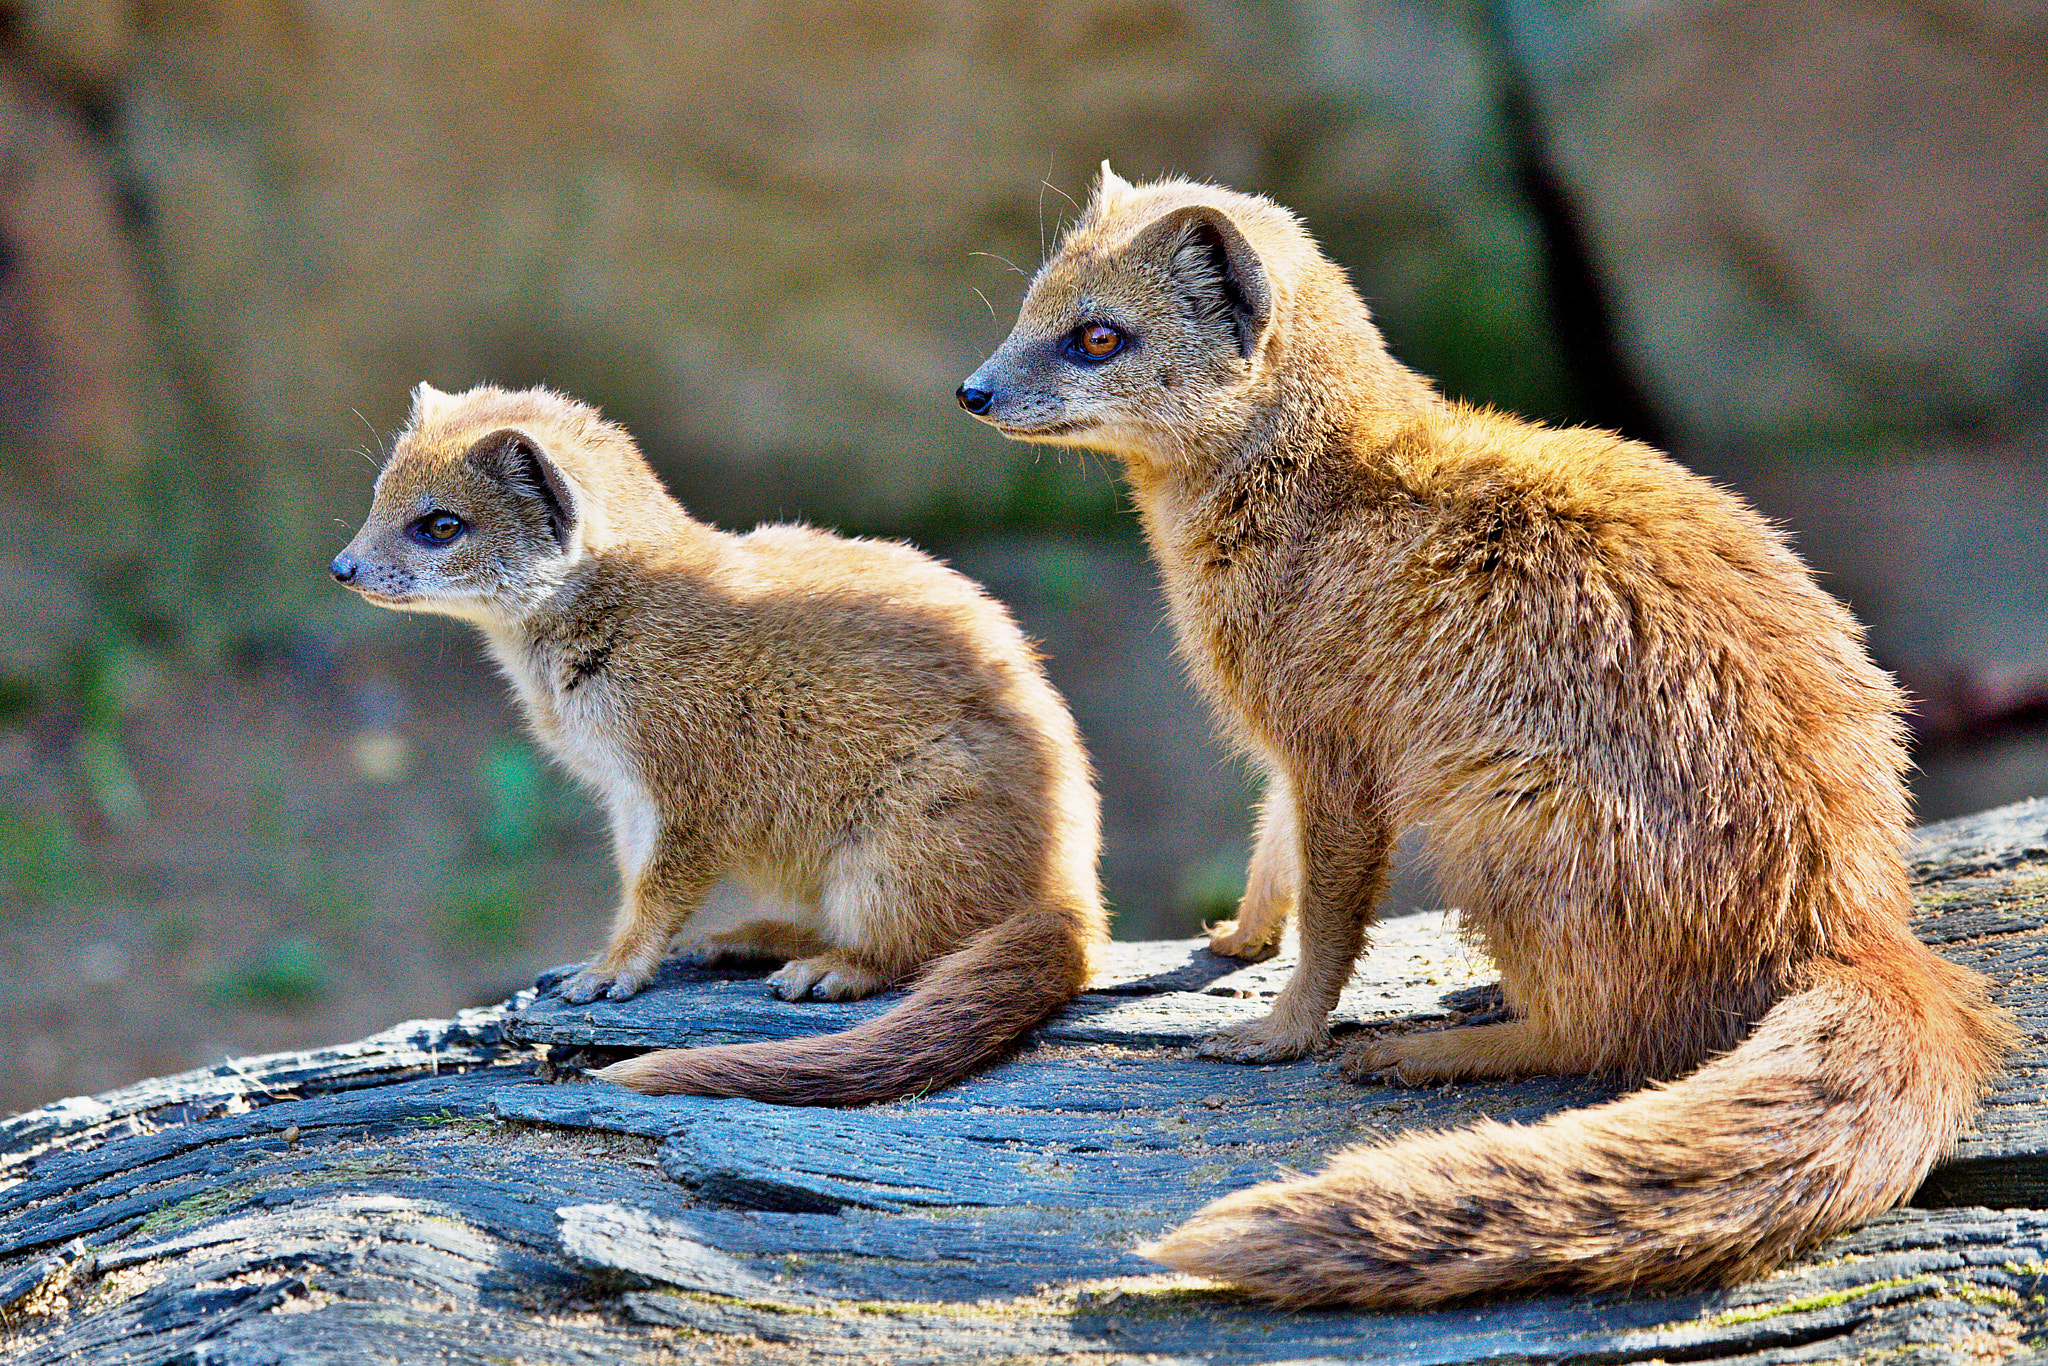 100.00 - 400.00 mm sample photo. Offspring and mother of yellow mongoose photography